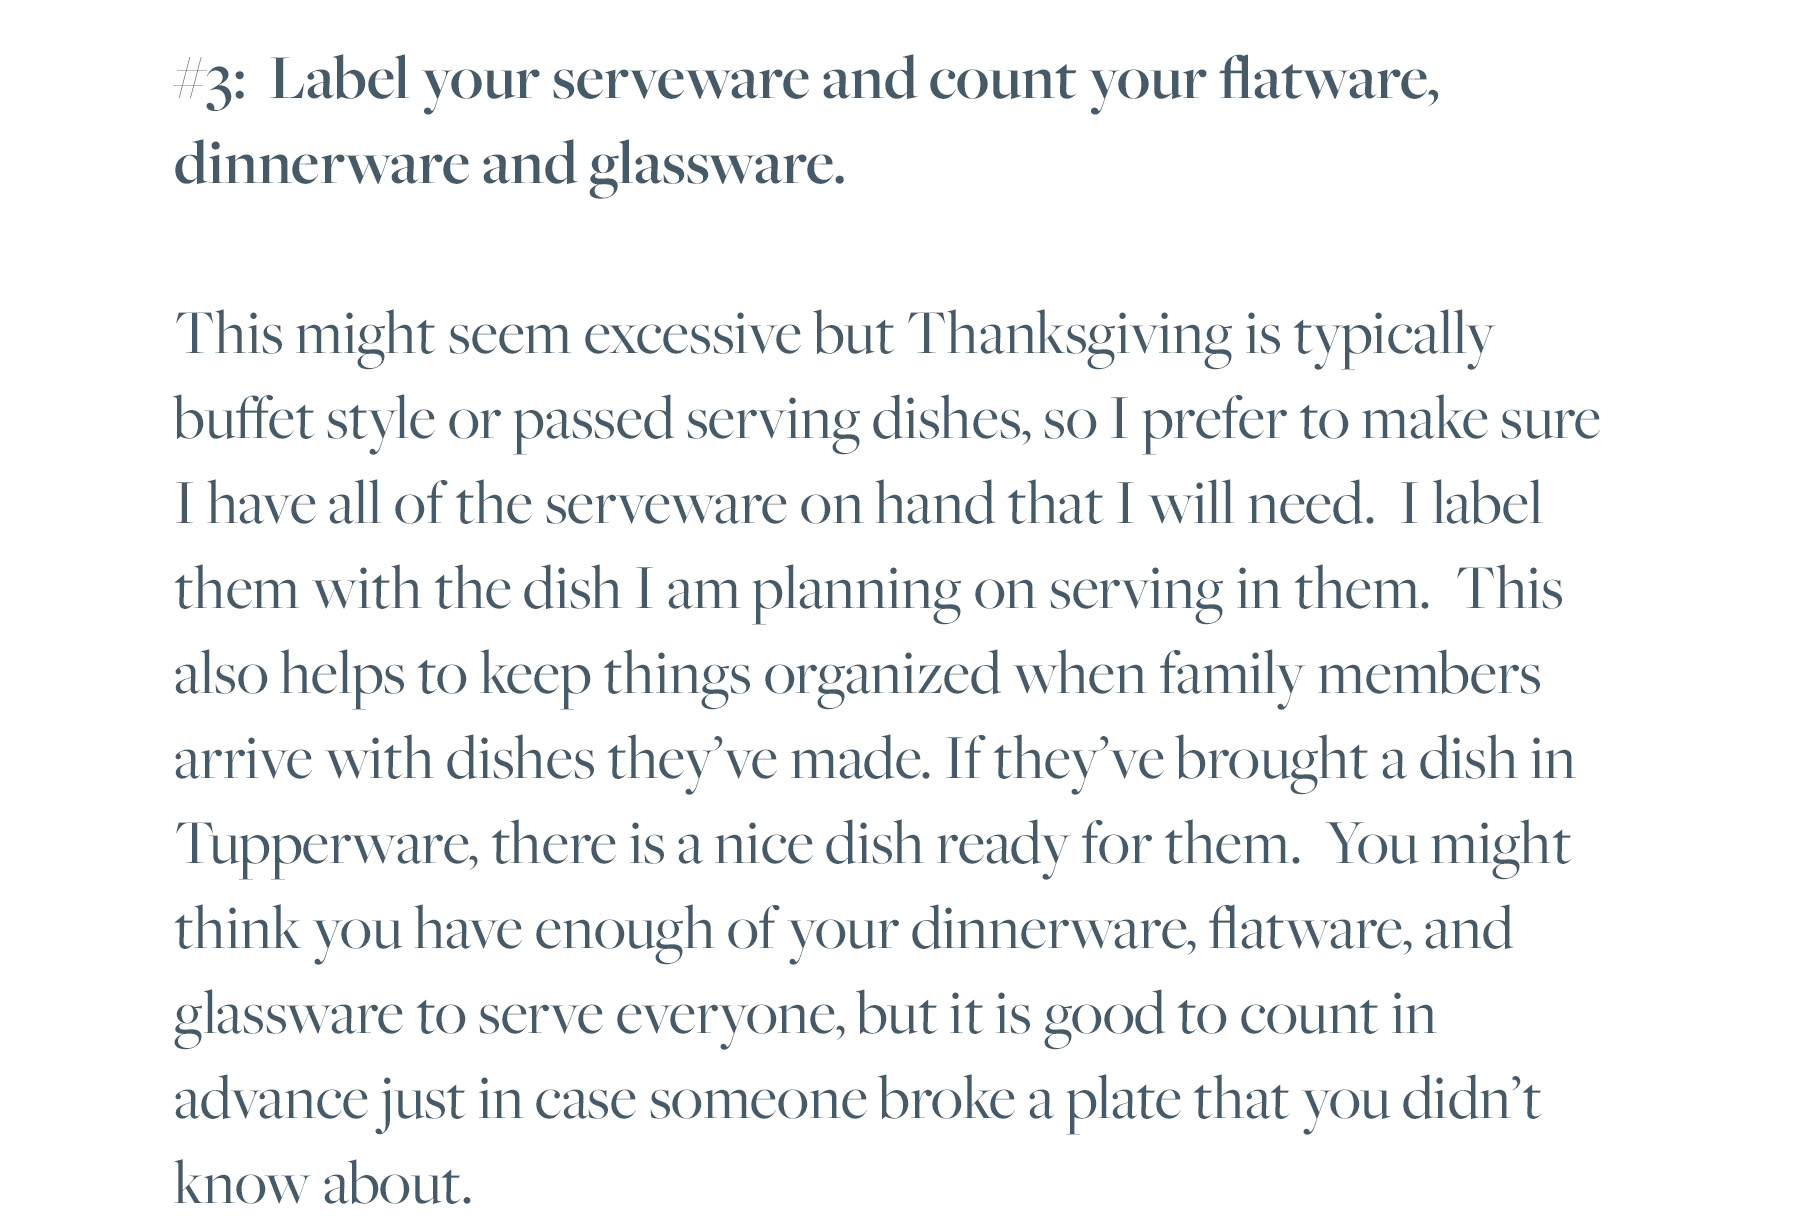 #3: Label your serveware and count your flatware, dinnerware and glassware. This might seem excessive but Thanksgiving is typically buffet style or passed serving dishes, so I prefer to make sure I have all of the serveware on hand that I will need. I label them with the dish I am planning on serving in them. This also helps to keep things organized when family members arrive with dishes they’ve made. If they’ve brought a dish in Tupperware, there is a nice dish ready for them. You might think you have enough of your dinnerware, flatware, and glassware to serve everyone, but it is good to count in advance just in case someone broke a plate that you didn’t know about. 